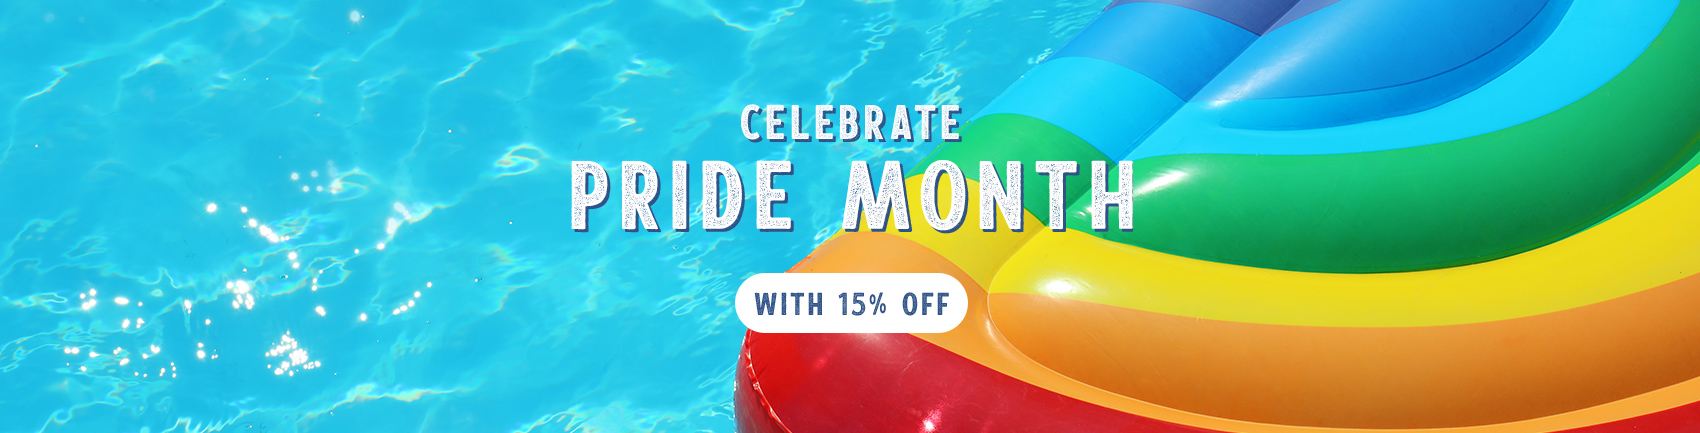 Celebrate Pride Month with 15% off.